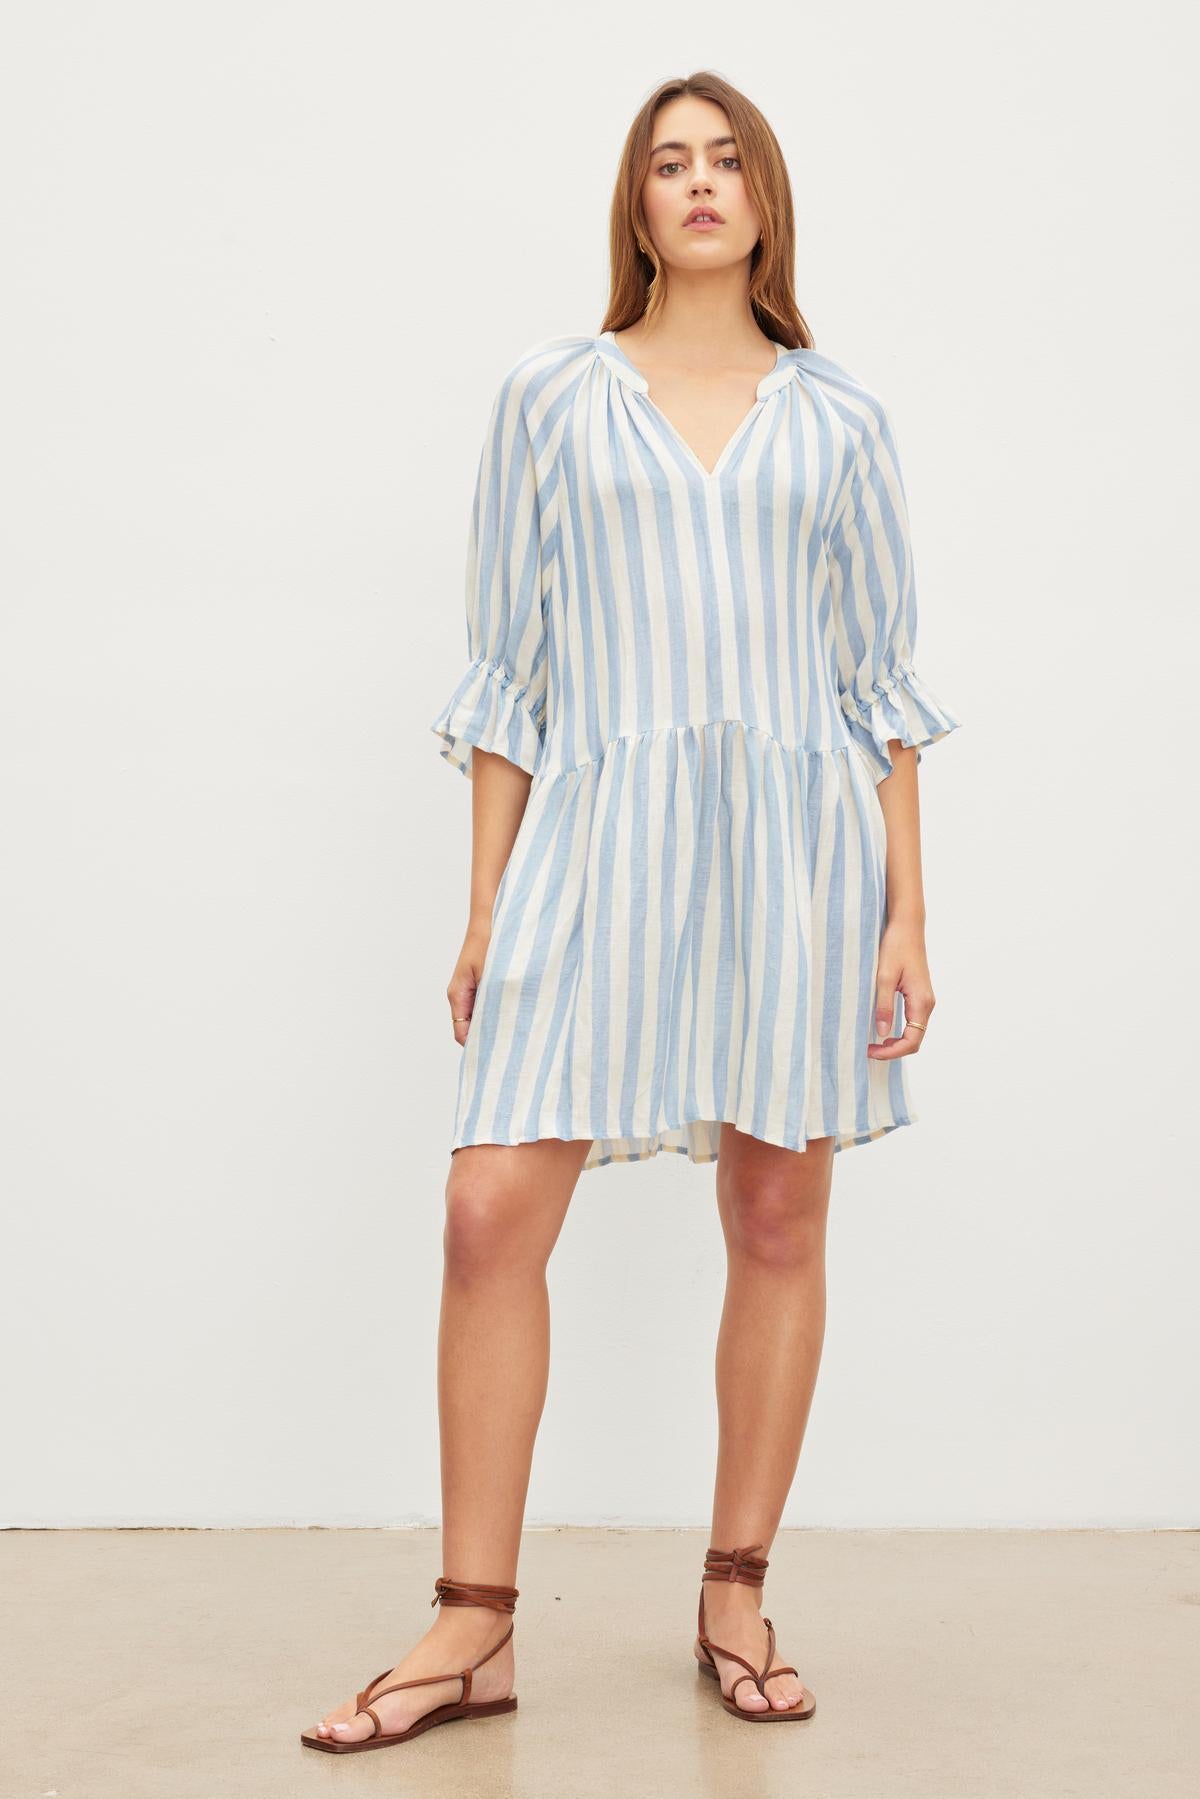 Woman in a Velvet by Graham & Spencer JESSICA STRIPED LINEN DRESS standing against a plain background.-36580699537601